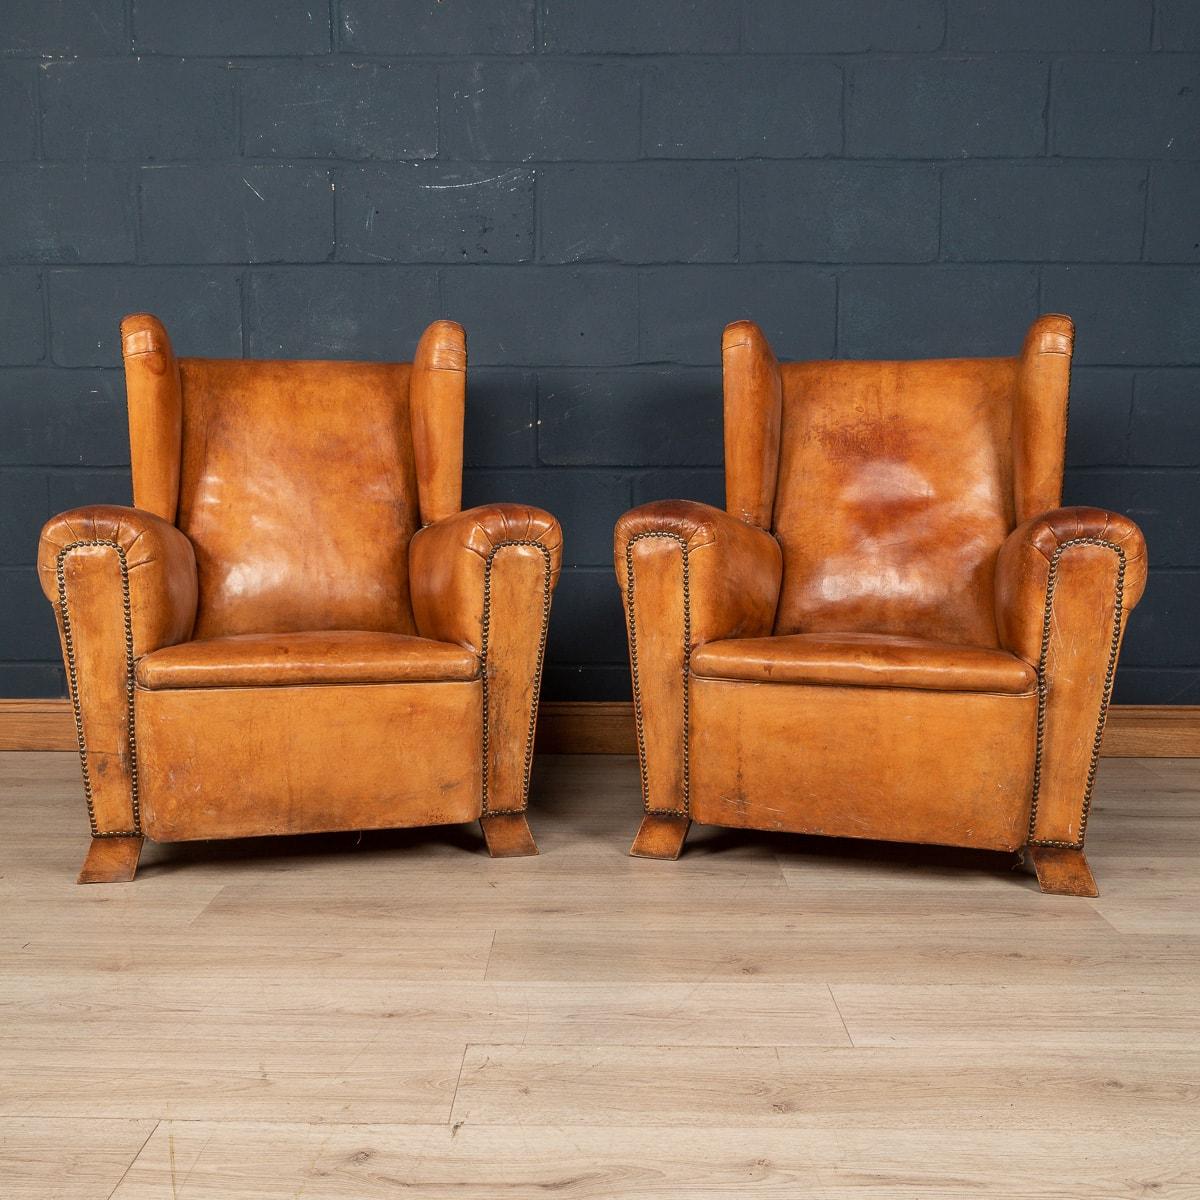 A gorgeous pair of French leather wing back chairs, circa 1880/1900. Structurally sound, superb quality, these chairs are of the finest quality and perennially ooze class and sophistication, extremely comfortable, and suit any style of